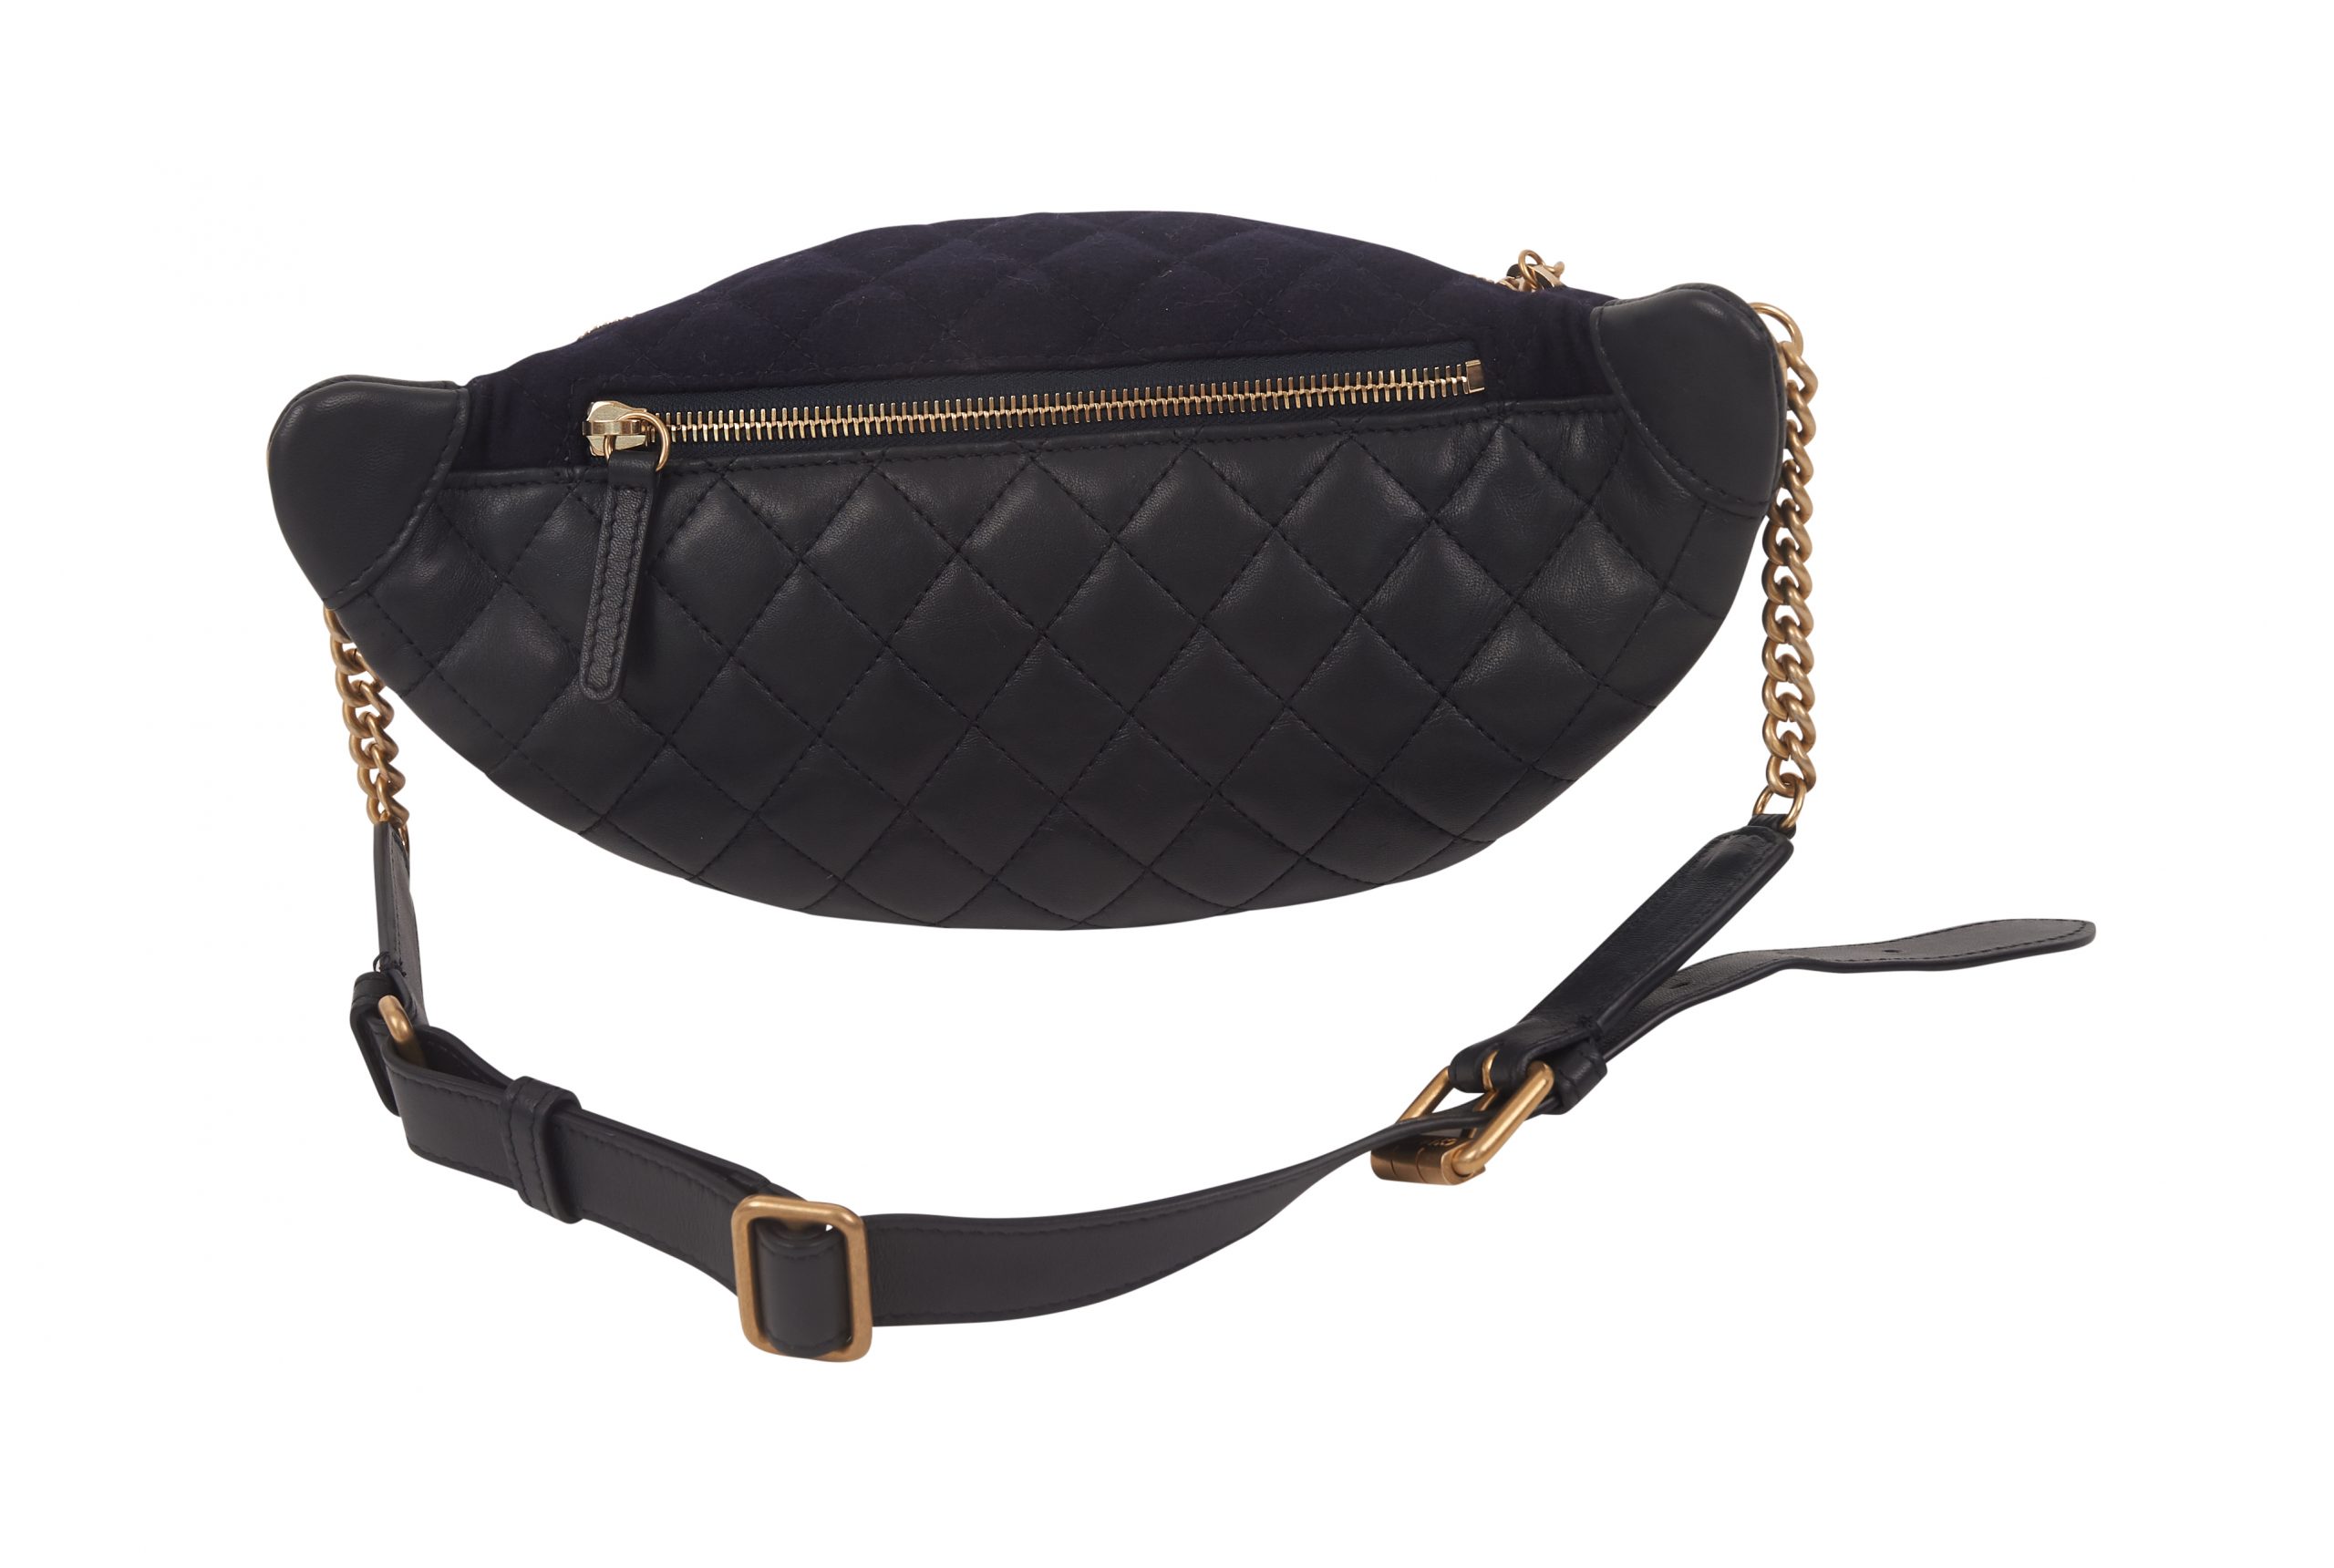 Chanel Sailor Fanny Pack